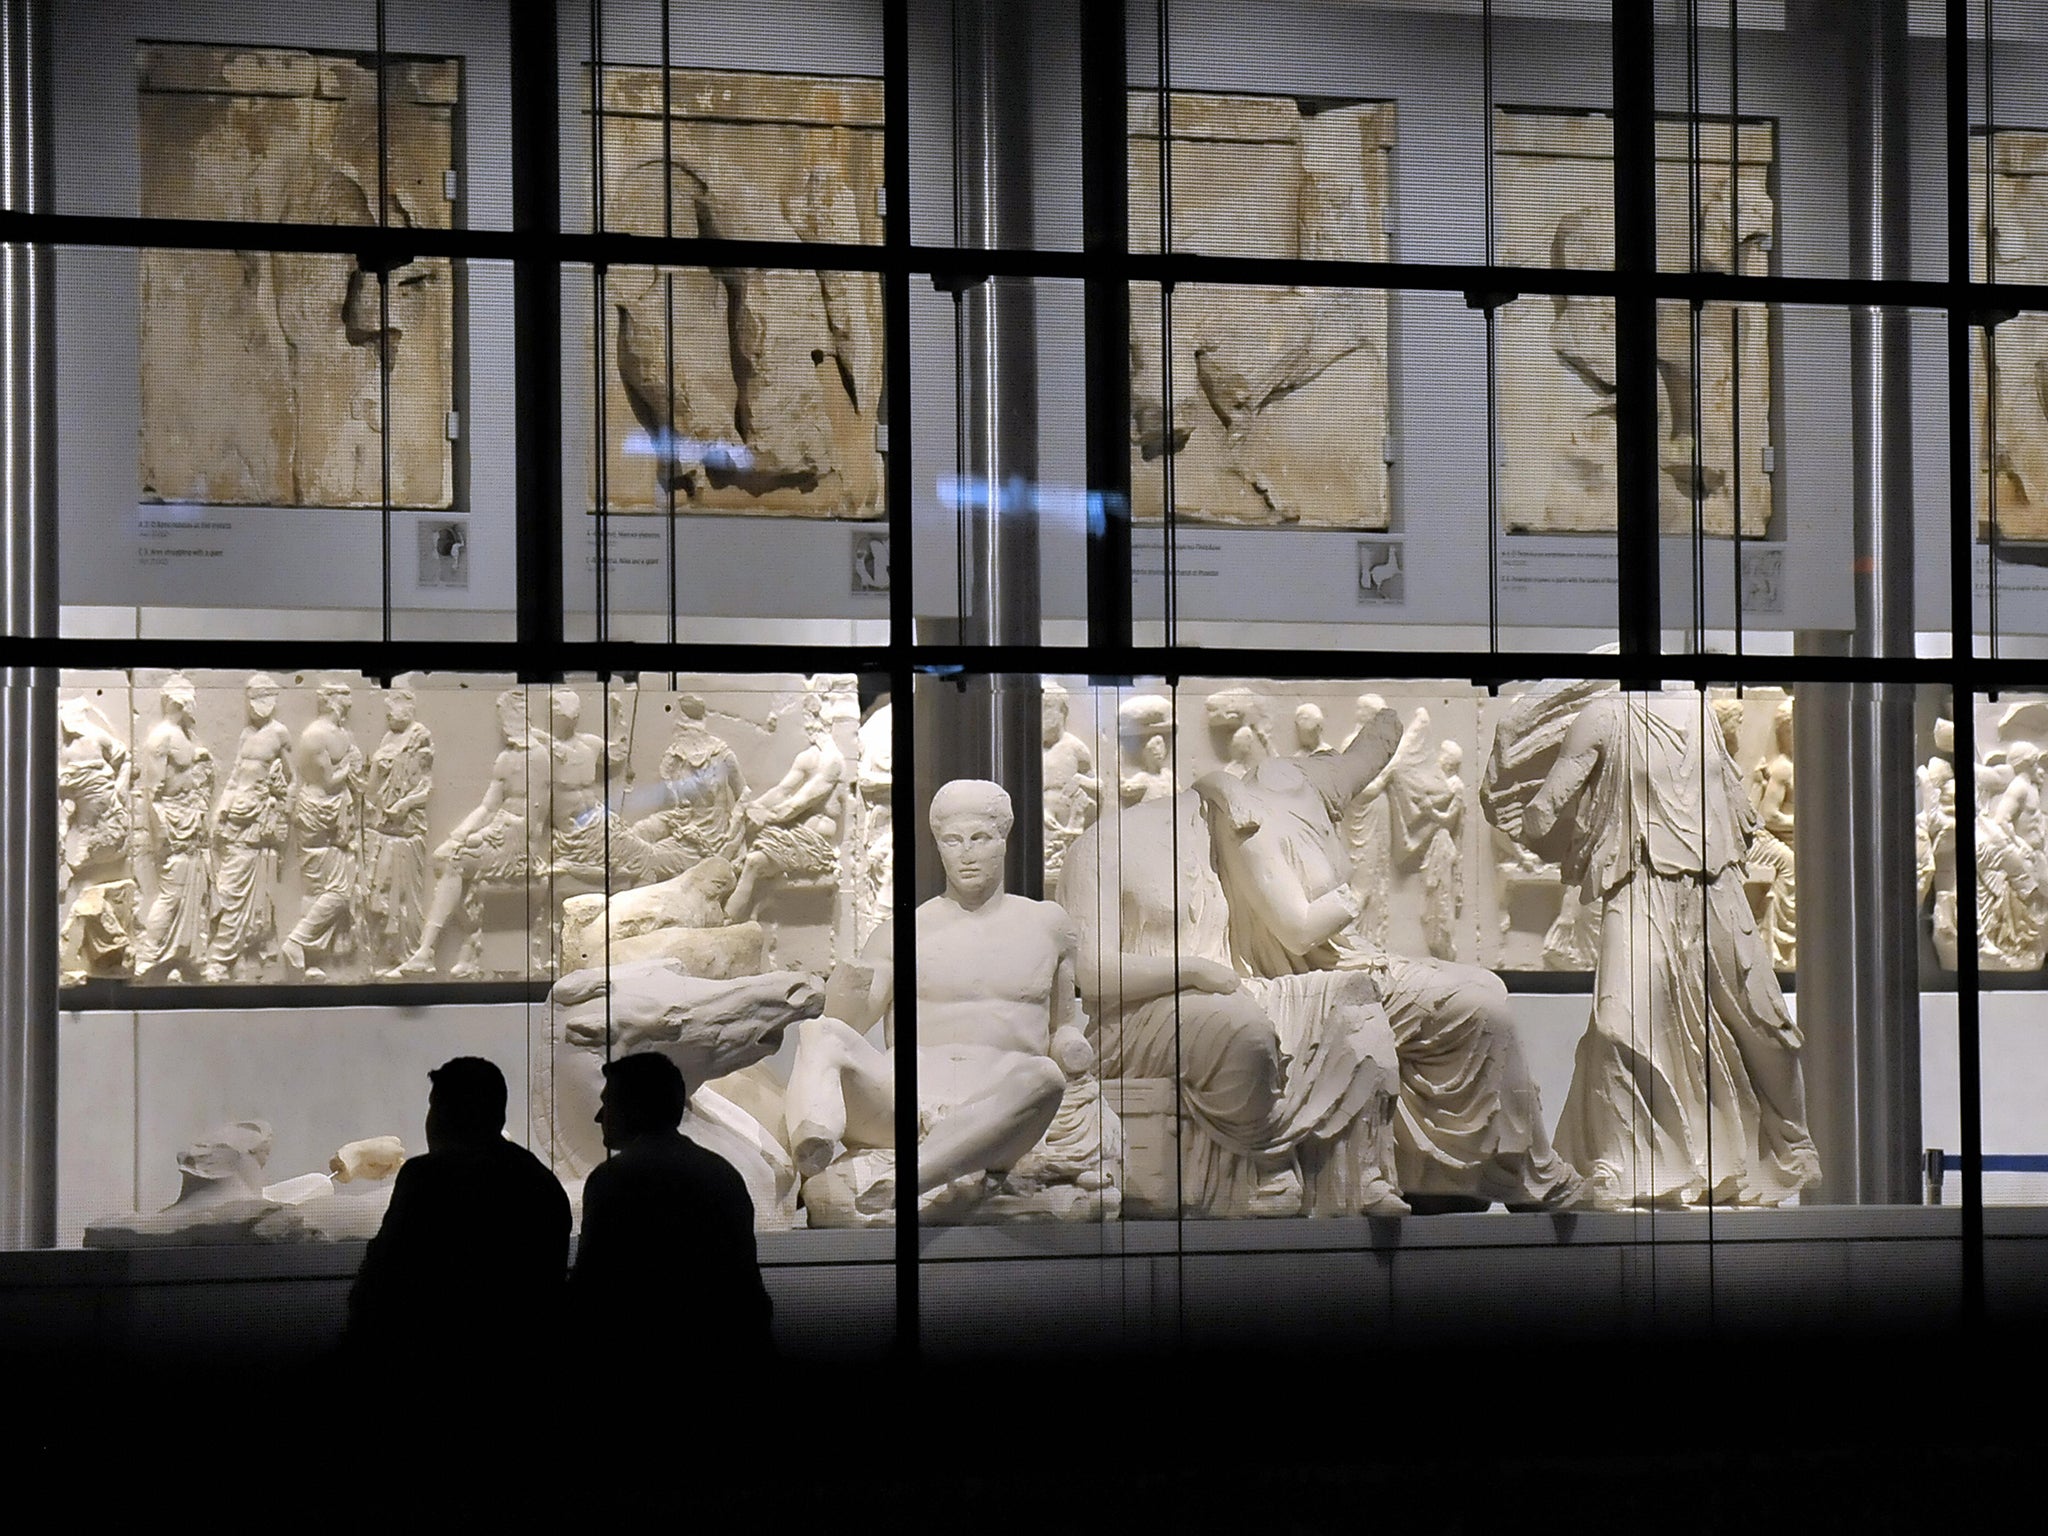 The Parthenon hall of the Acropolis Museum in Athens